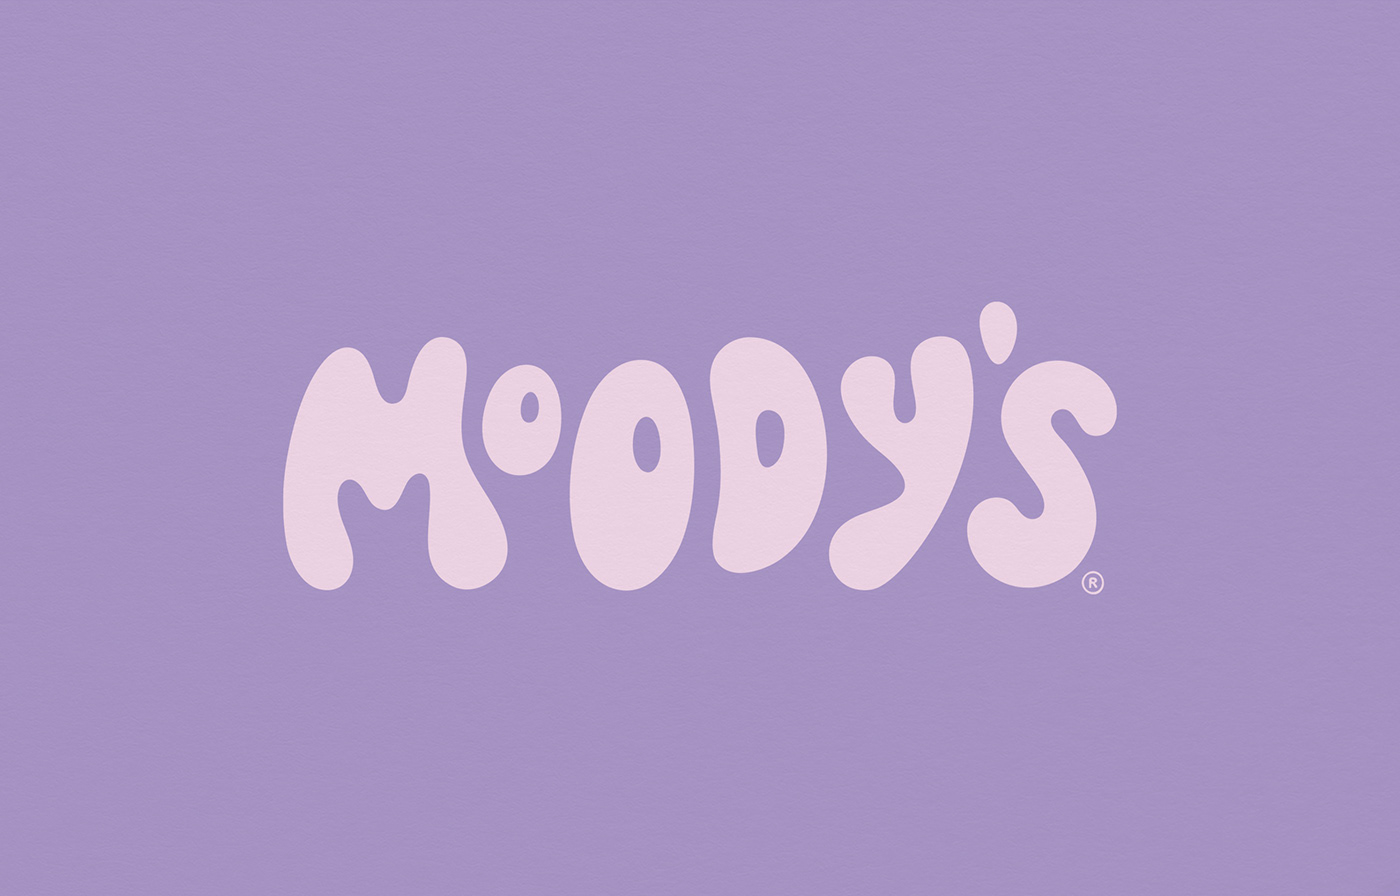 Branding and logo design for Moody's, designed by Abby Haddican Studio.